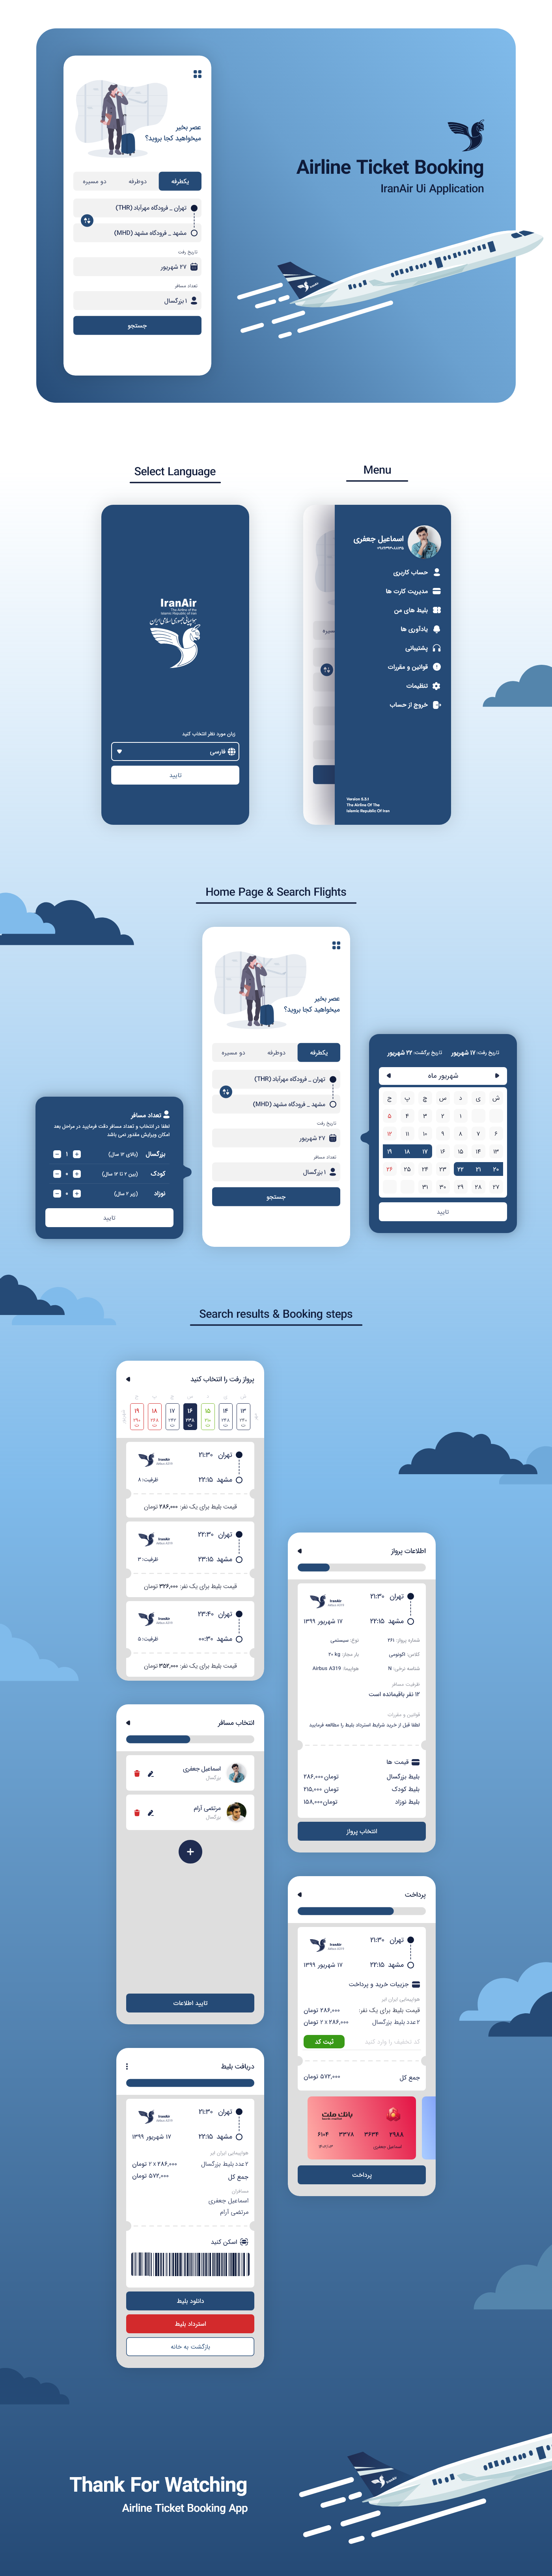 airline airplane airport app Booking flight iranair search ticket UI